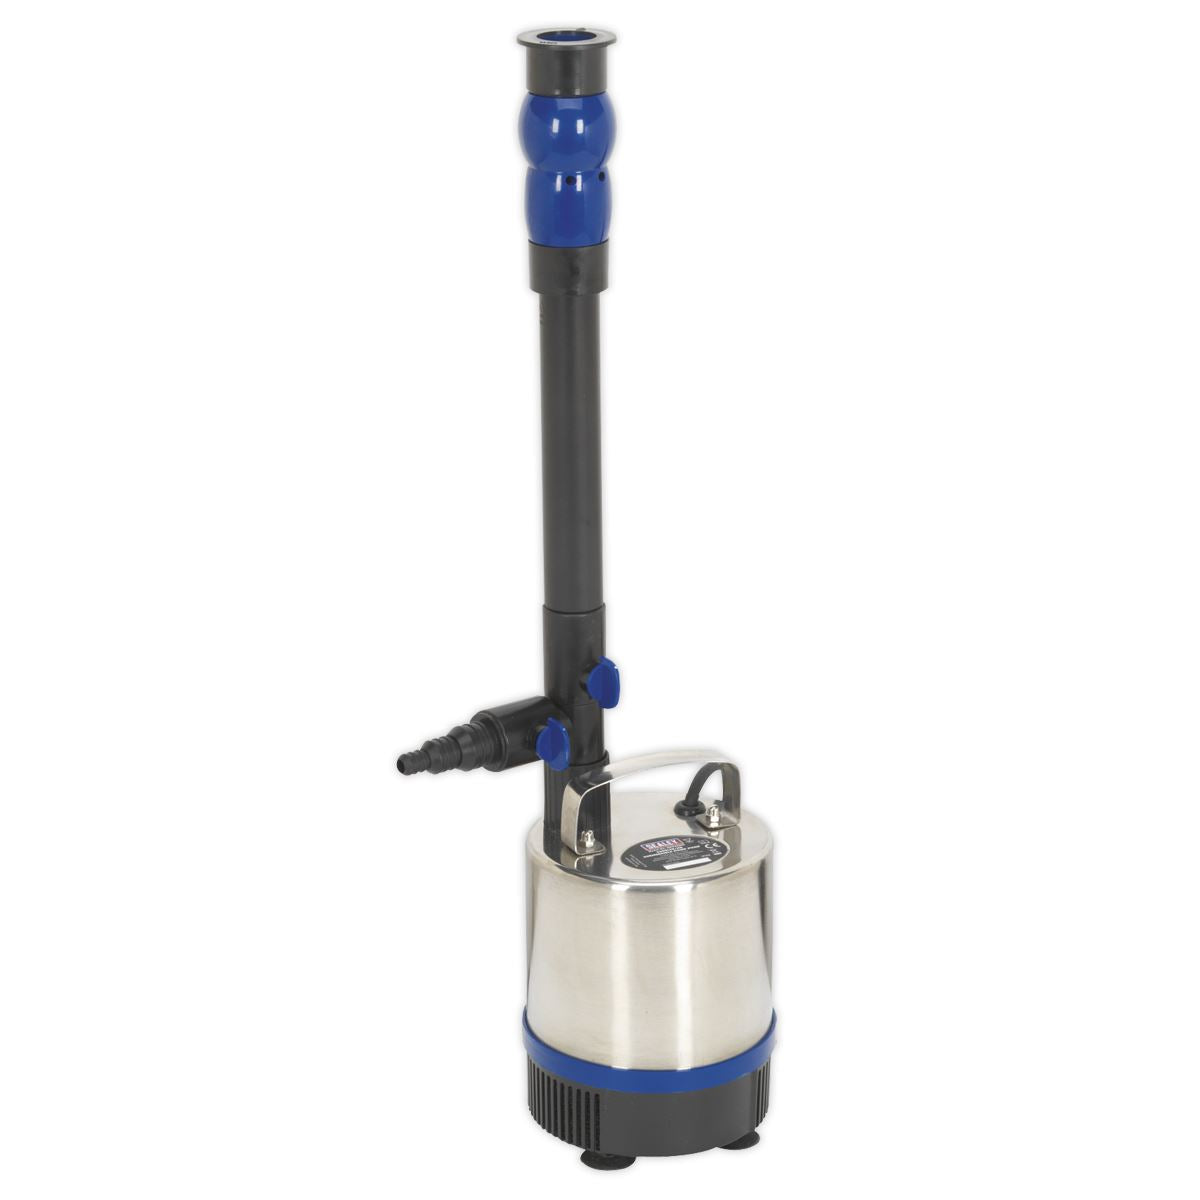 Sealey Submersible Pond Pump Stainless Steel 3600L/hr 230V